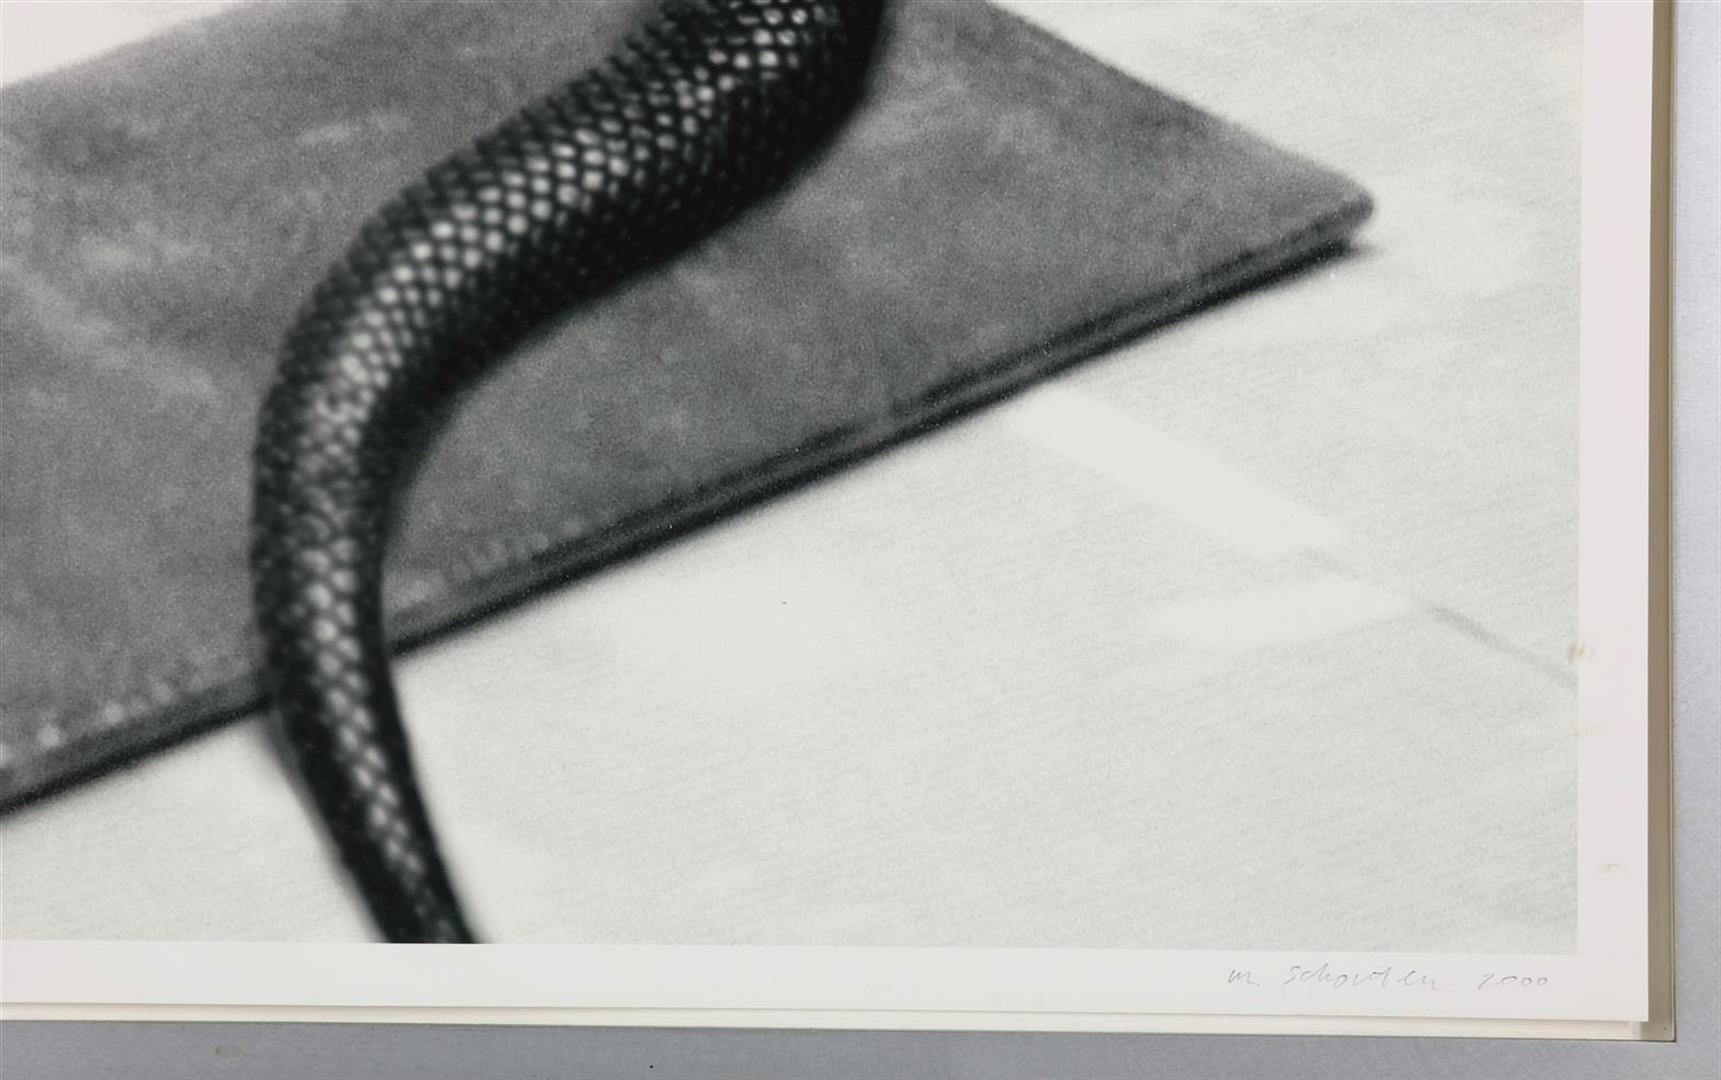 Marien Schouten (1956-) Snake, "Mirogard Magic", signed and dated 2000 bottom right, edition 7/40, - Image 3 of 4